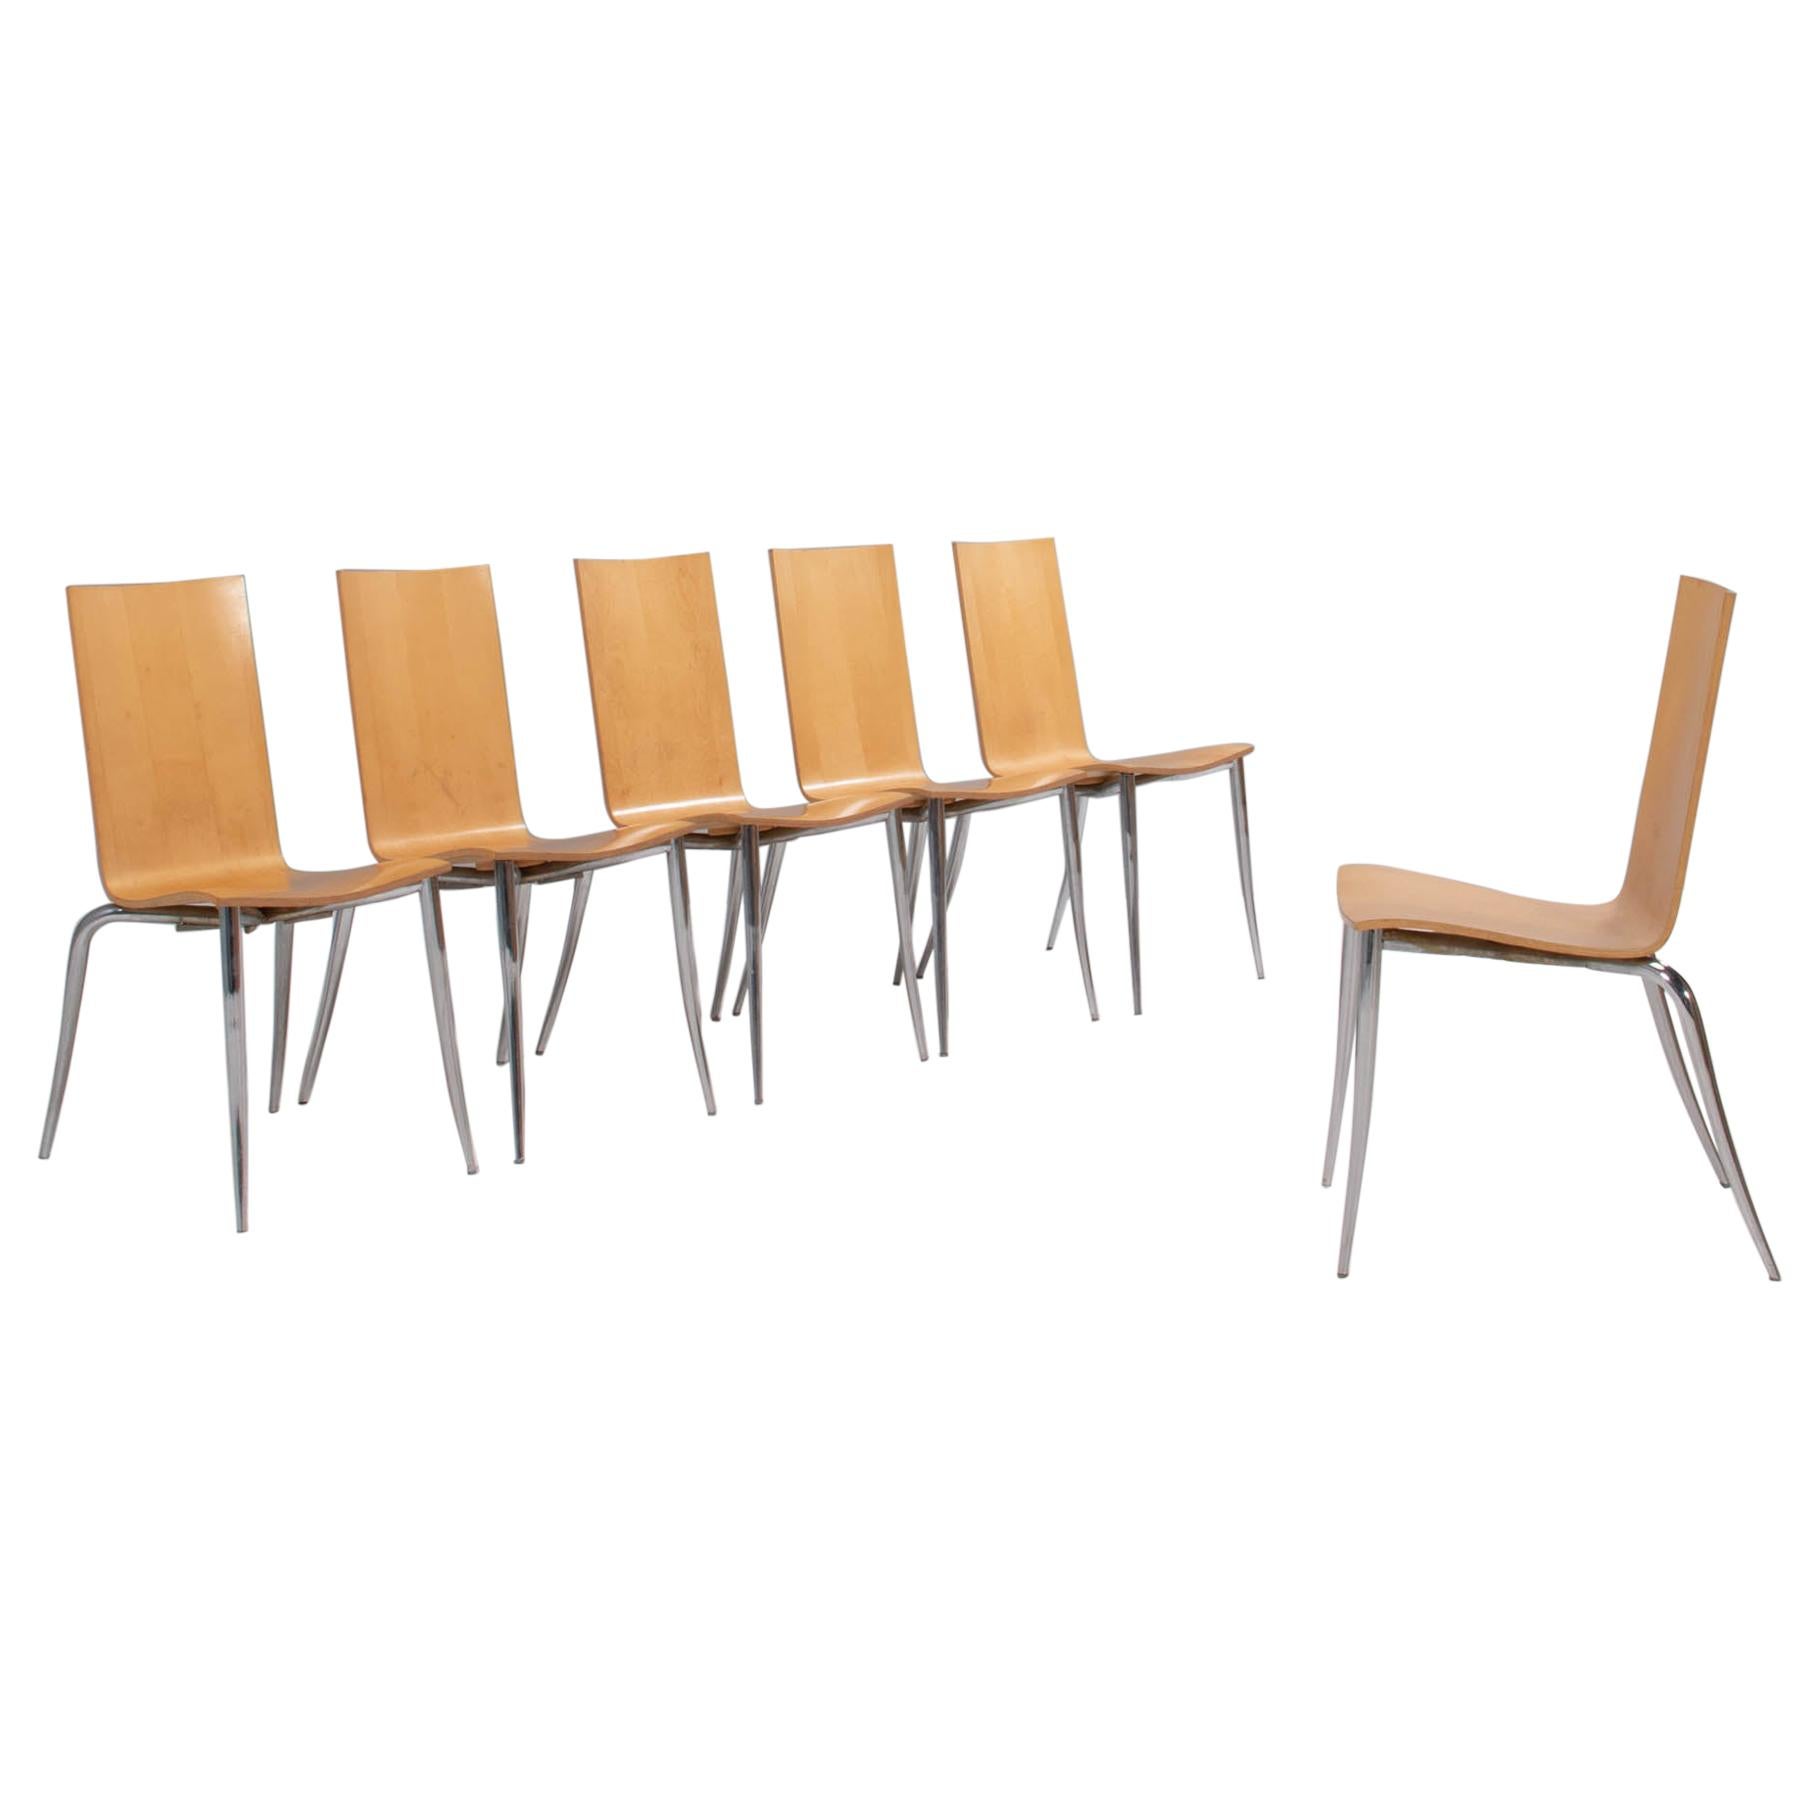 Philippe Starck for Driade Olly Tango Chairs, Set of 6